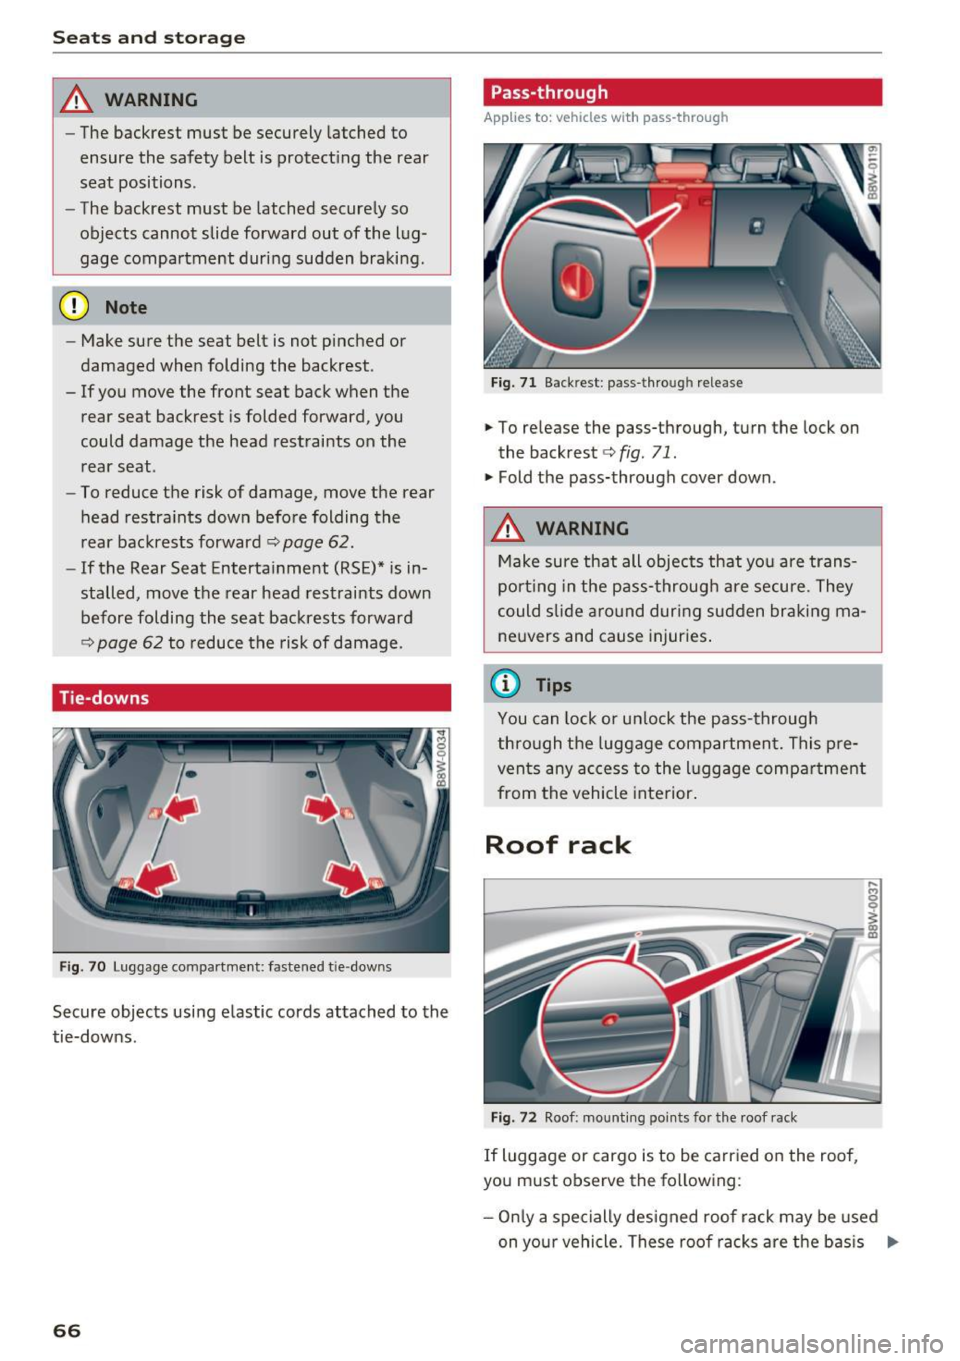 AUDI A4 2017  Owners Manual Sea ts  and  stor age 
_&. WARNING 
- The  backrest  must  be  securely  latched  to 
ensure  th e safety  belt  is protect ing  the  rear 
seat  positions . 
- The  backrest  must  be  latched  secu 